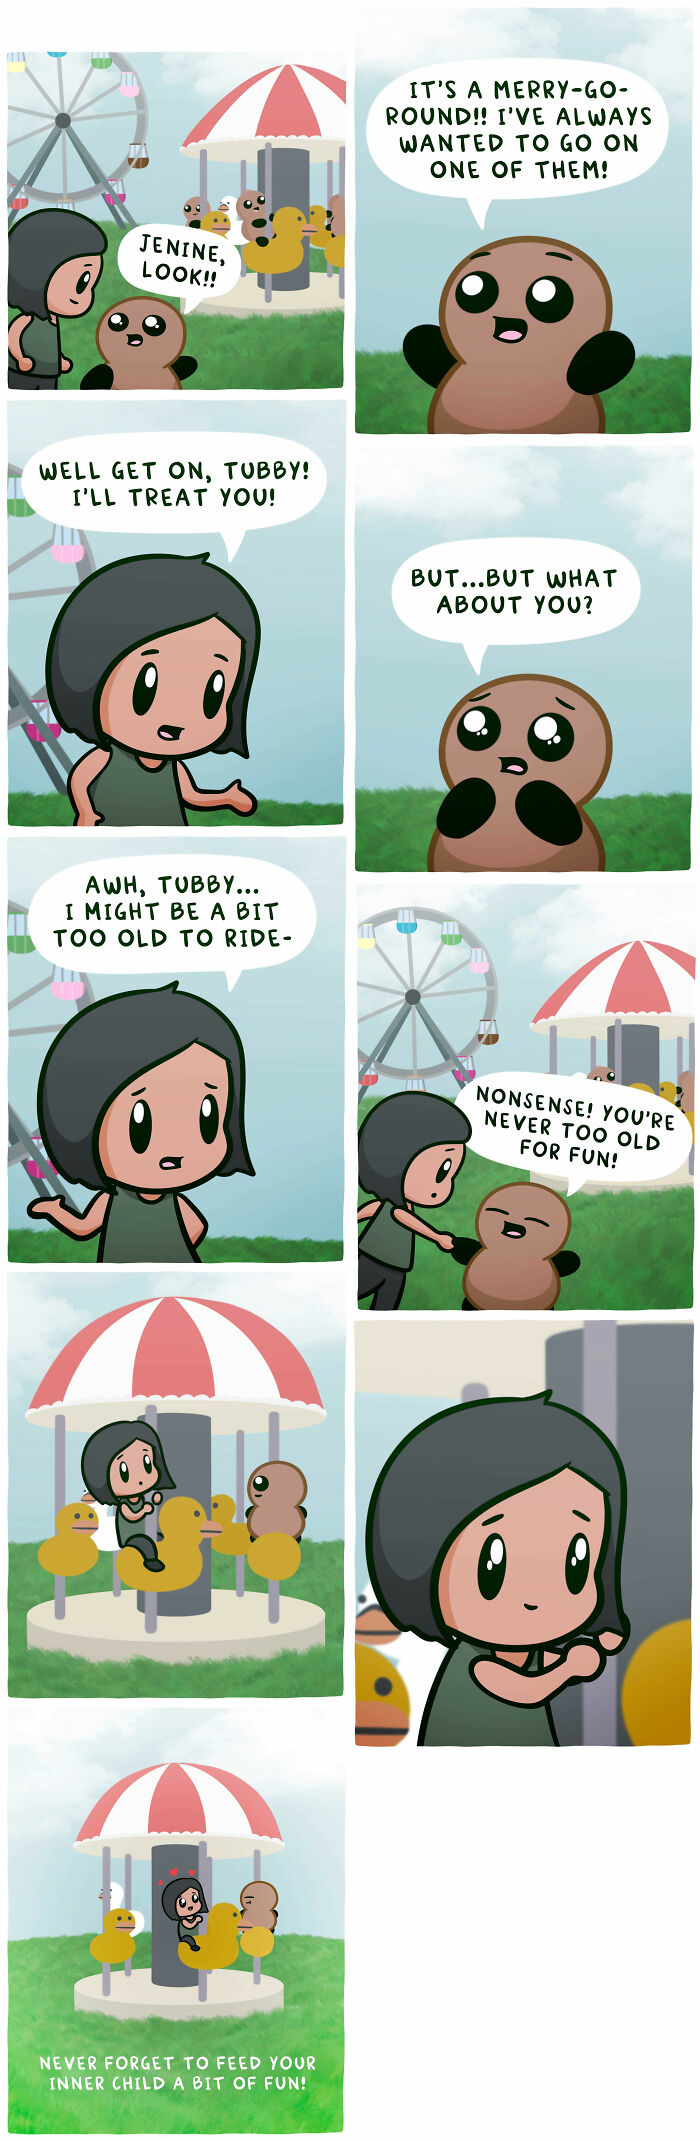 Make Your Day With Tubby Nugget's Unbearably Cute New Comics